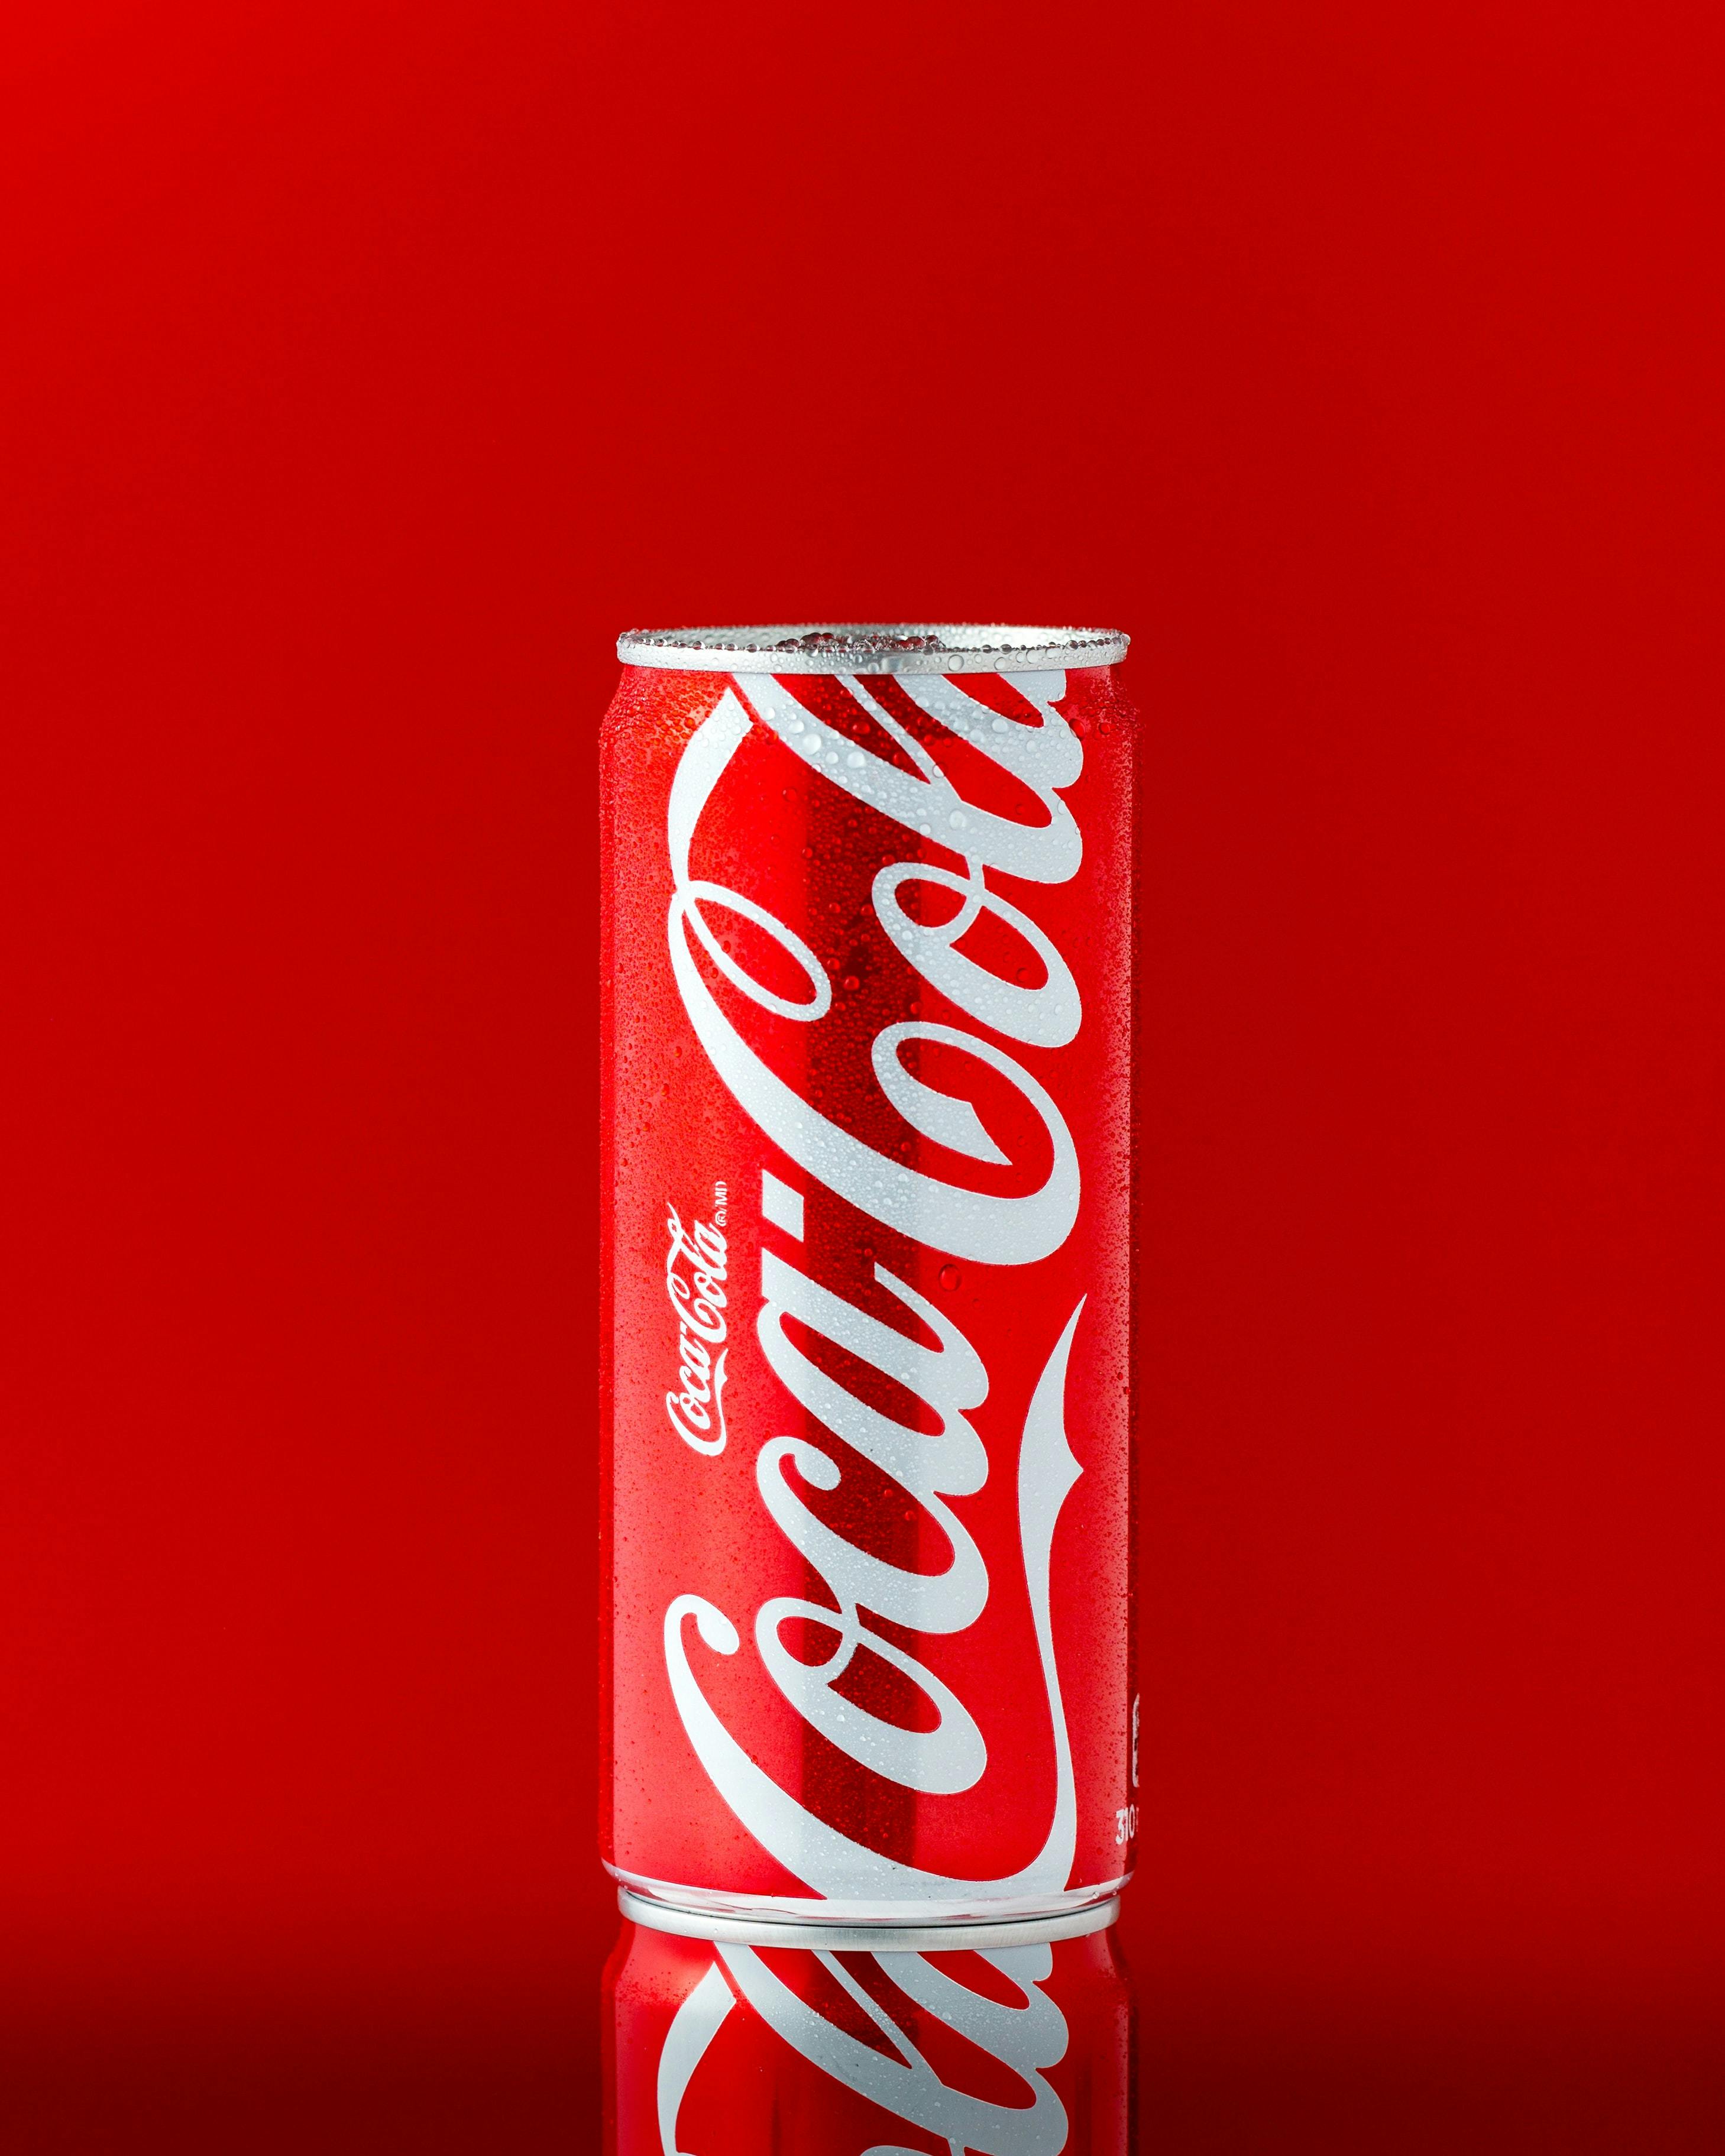 a bottle of brand on red background.